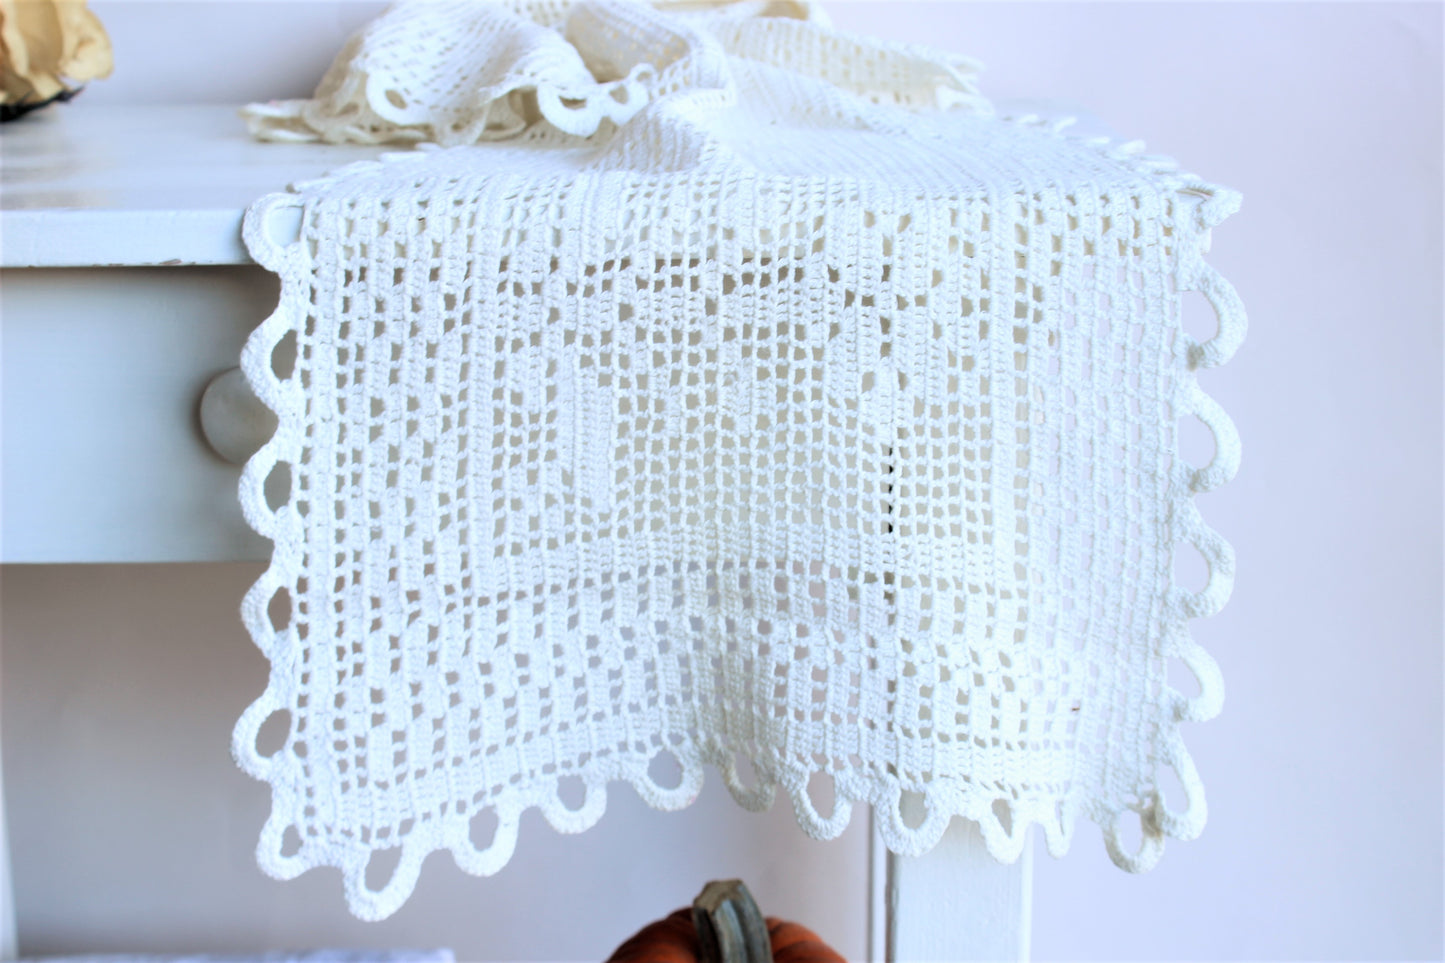 Vintage 1960s Crochet Table runners or Sofa Covers